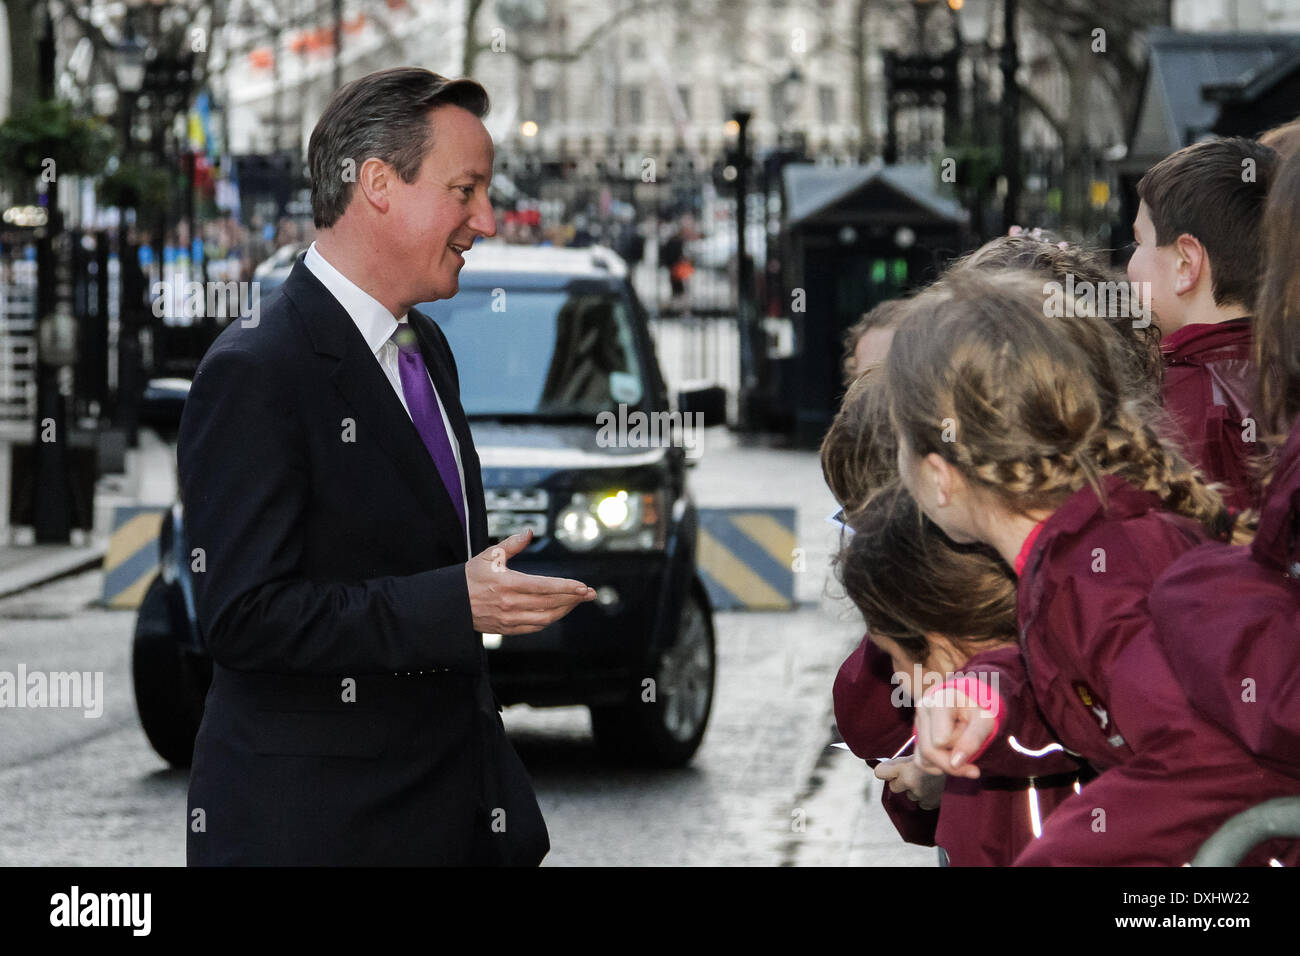 London, UK. 26th March 2014. British Prime Minister David Cameron outside Downing Street meeting with local visiting school children before a meeting with Ukrainian UDAR party MP Vitali Klitschko. Credit:  Guy Corbishley/Alamy Live News Stock Photo